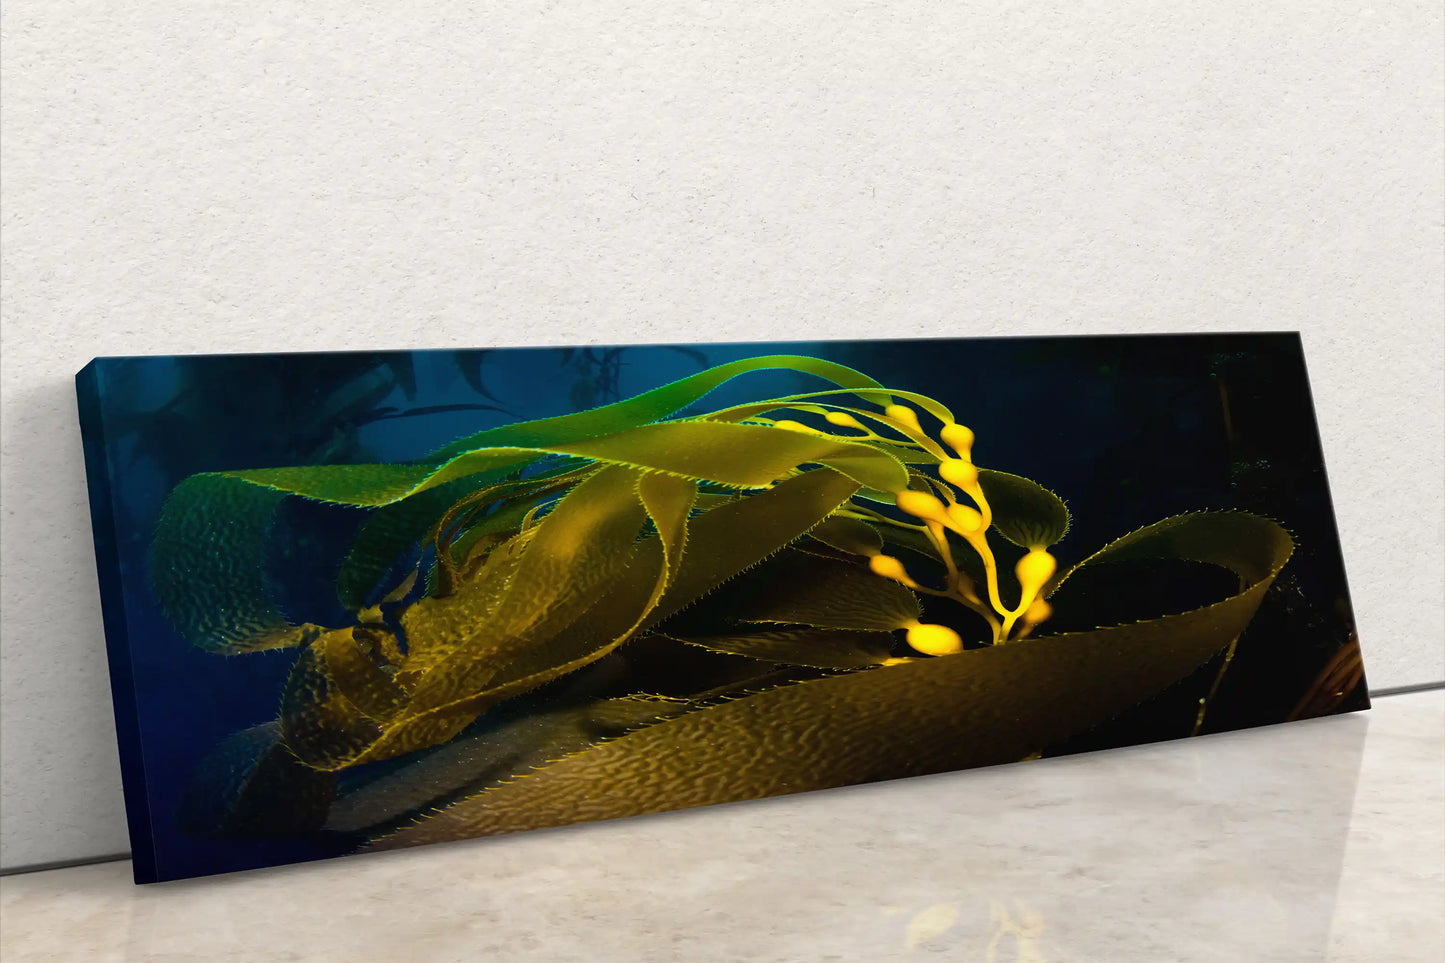 Panoramic canvas wall art of an underwater kelp forest with vibrant yellow and green kelp leaves against a dark blue sea.